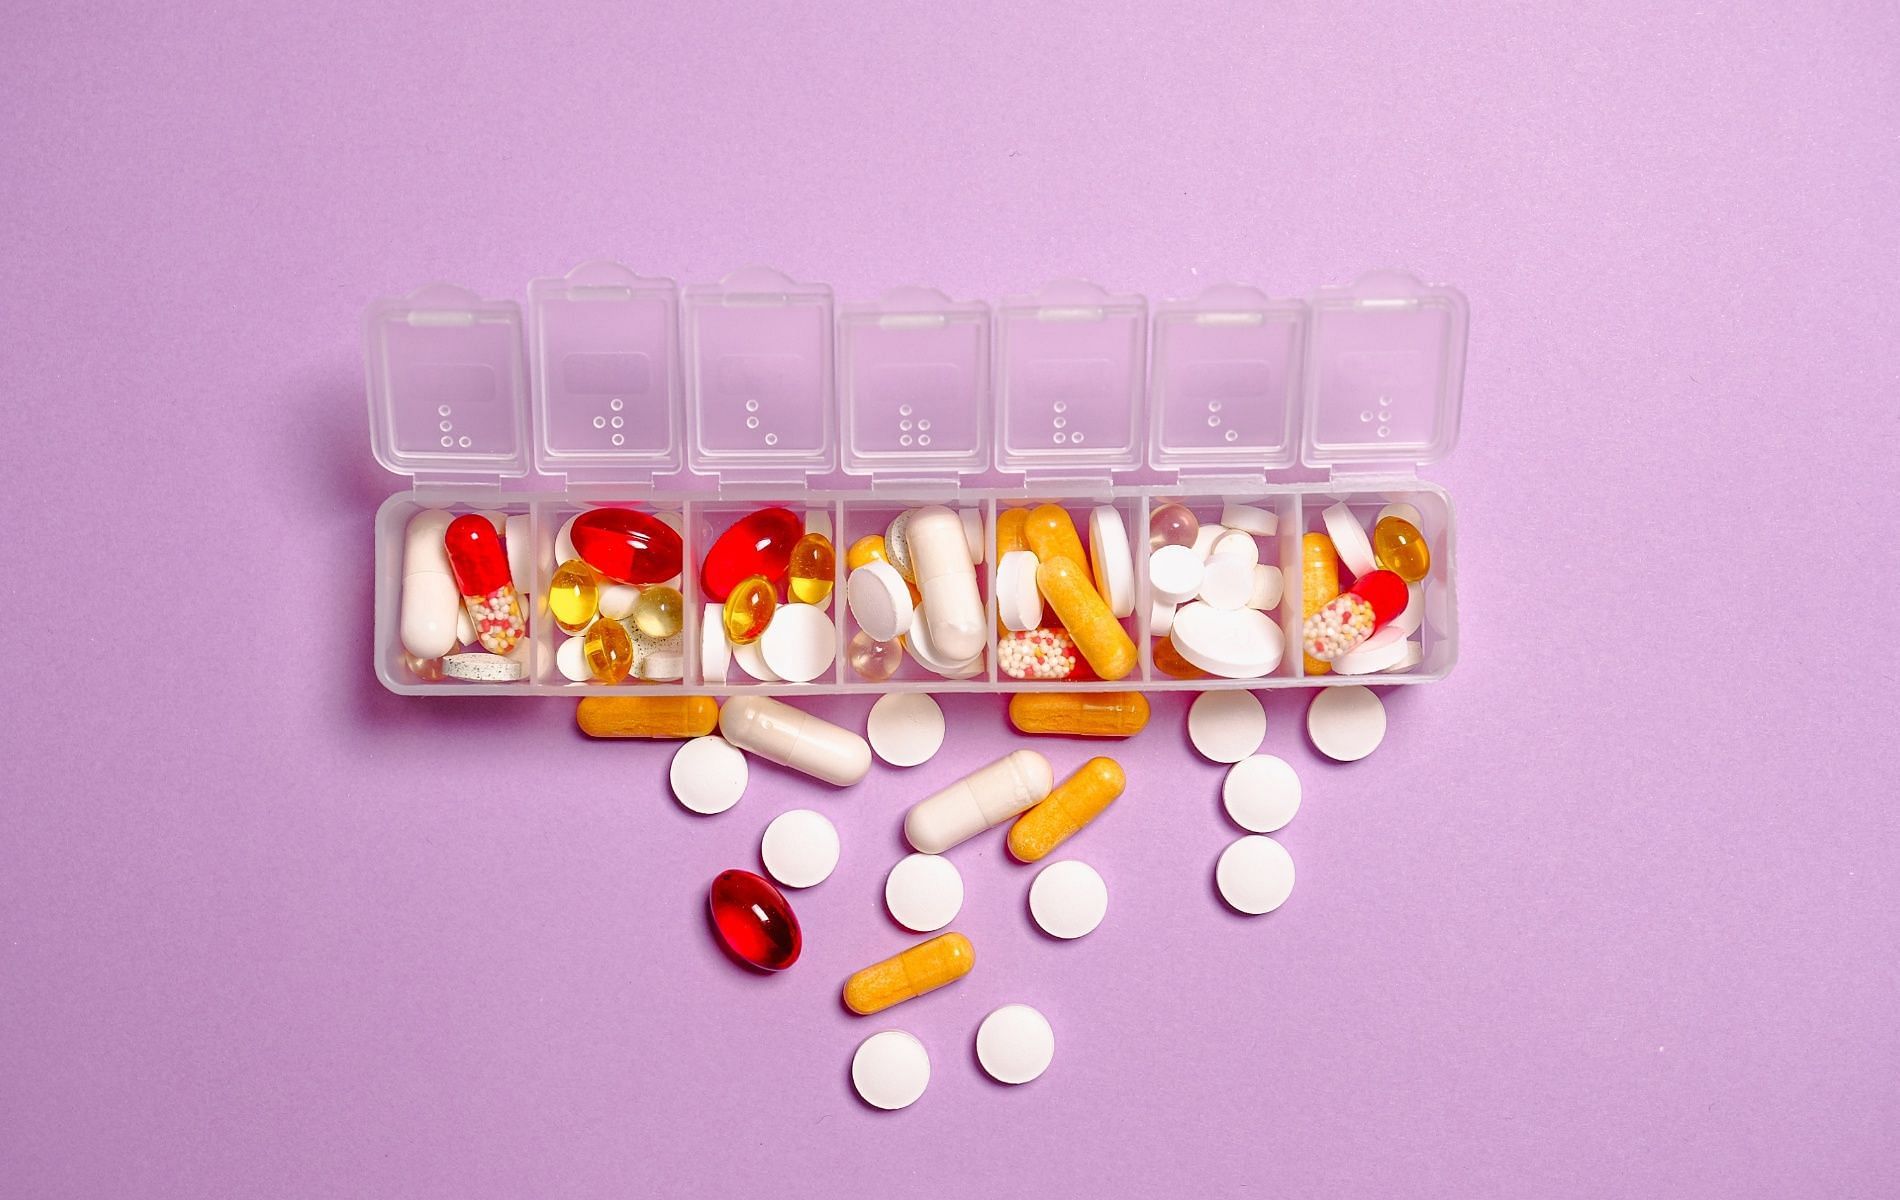 overdosing on vitamin A supplements can cause chronic or acute hypervitaminosis (Image by Anna Shvets via Pexels)